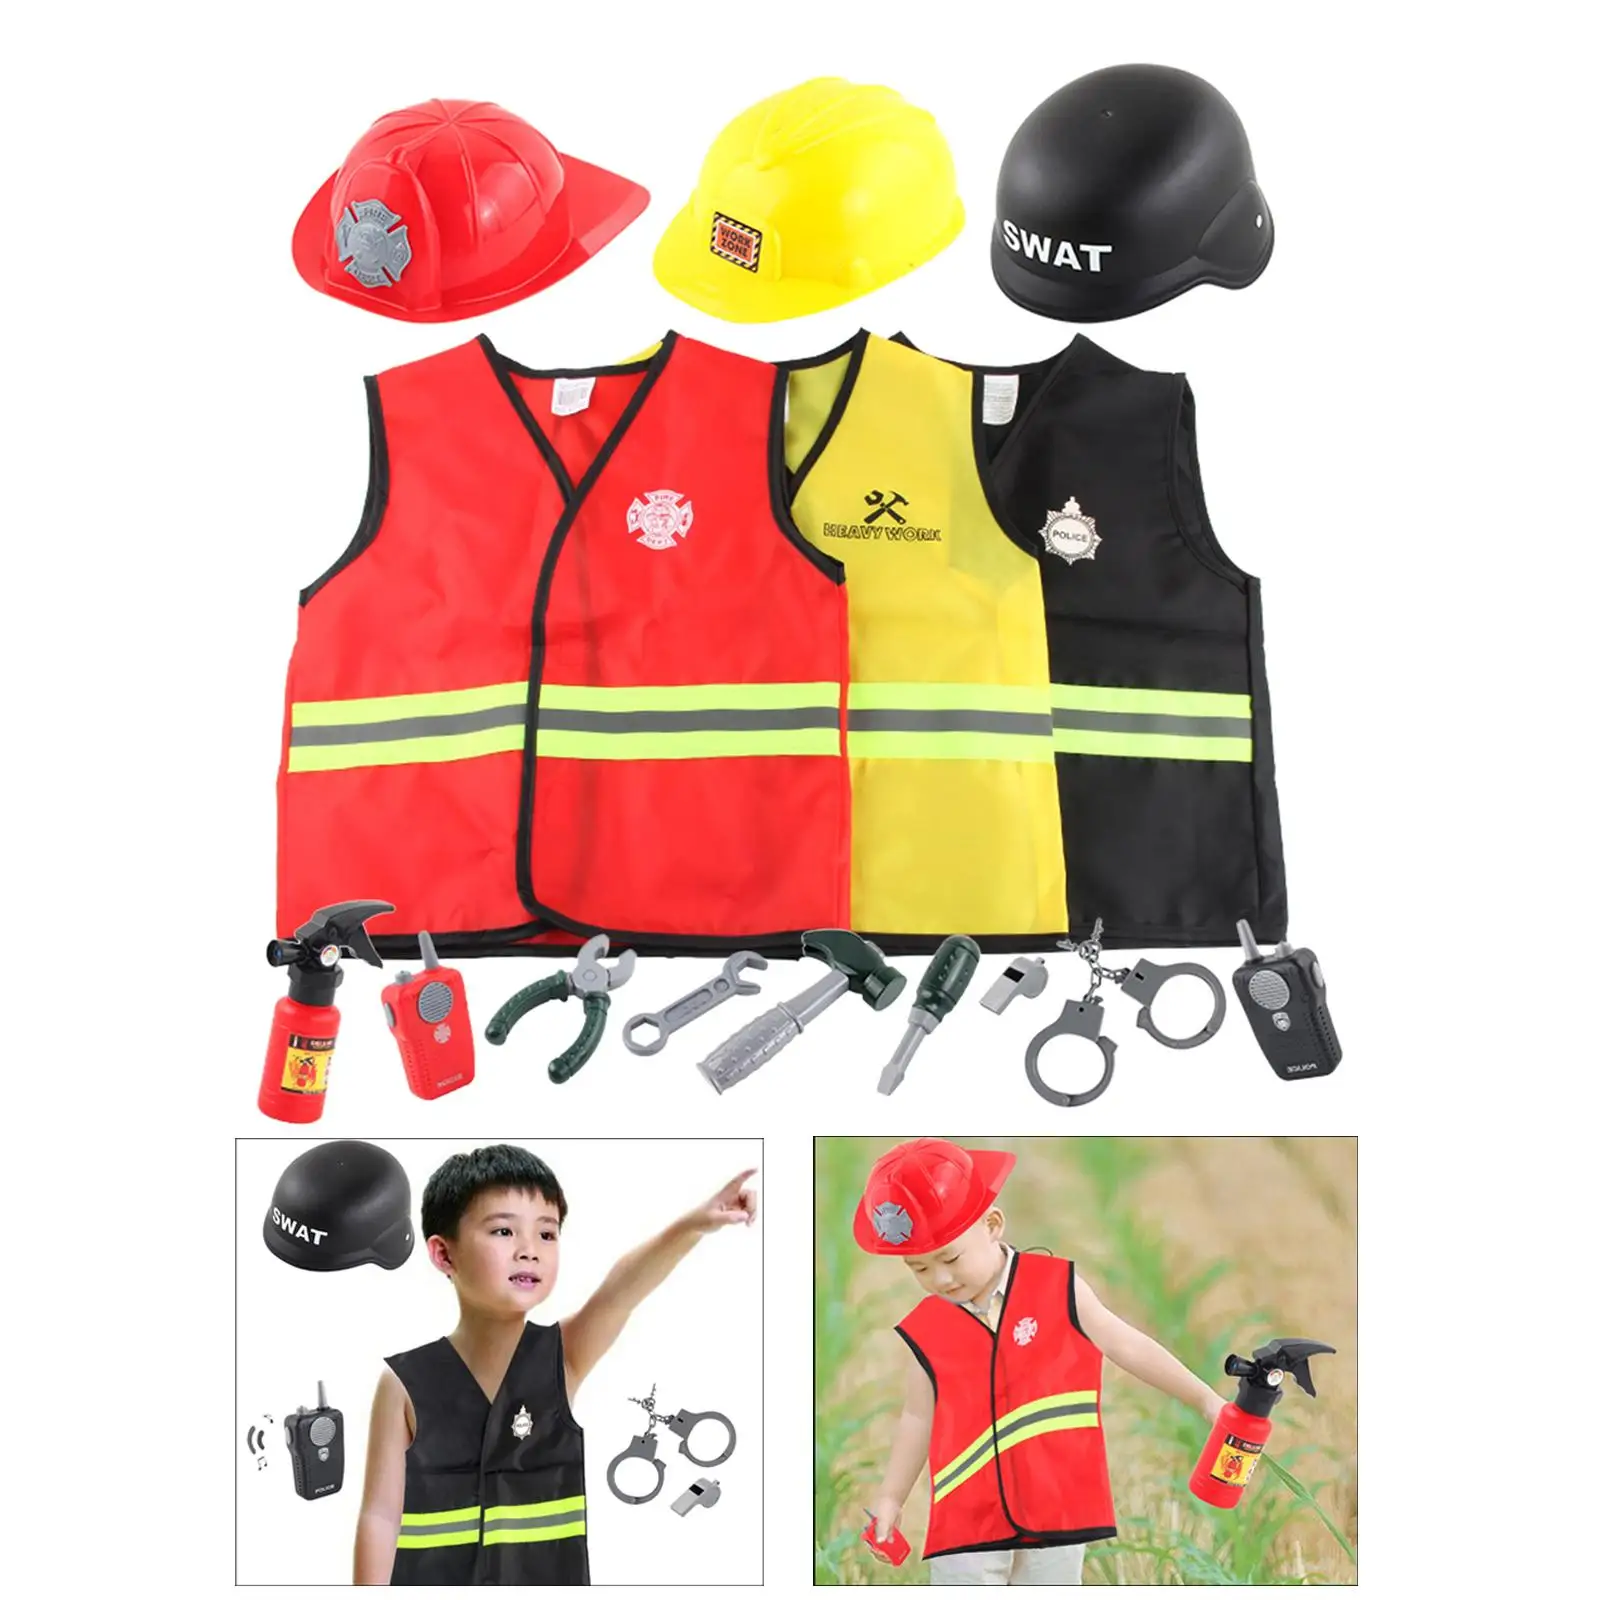 Fireman Costume  Uniform Construction Worker Costume Toy Set for Party